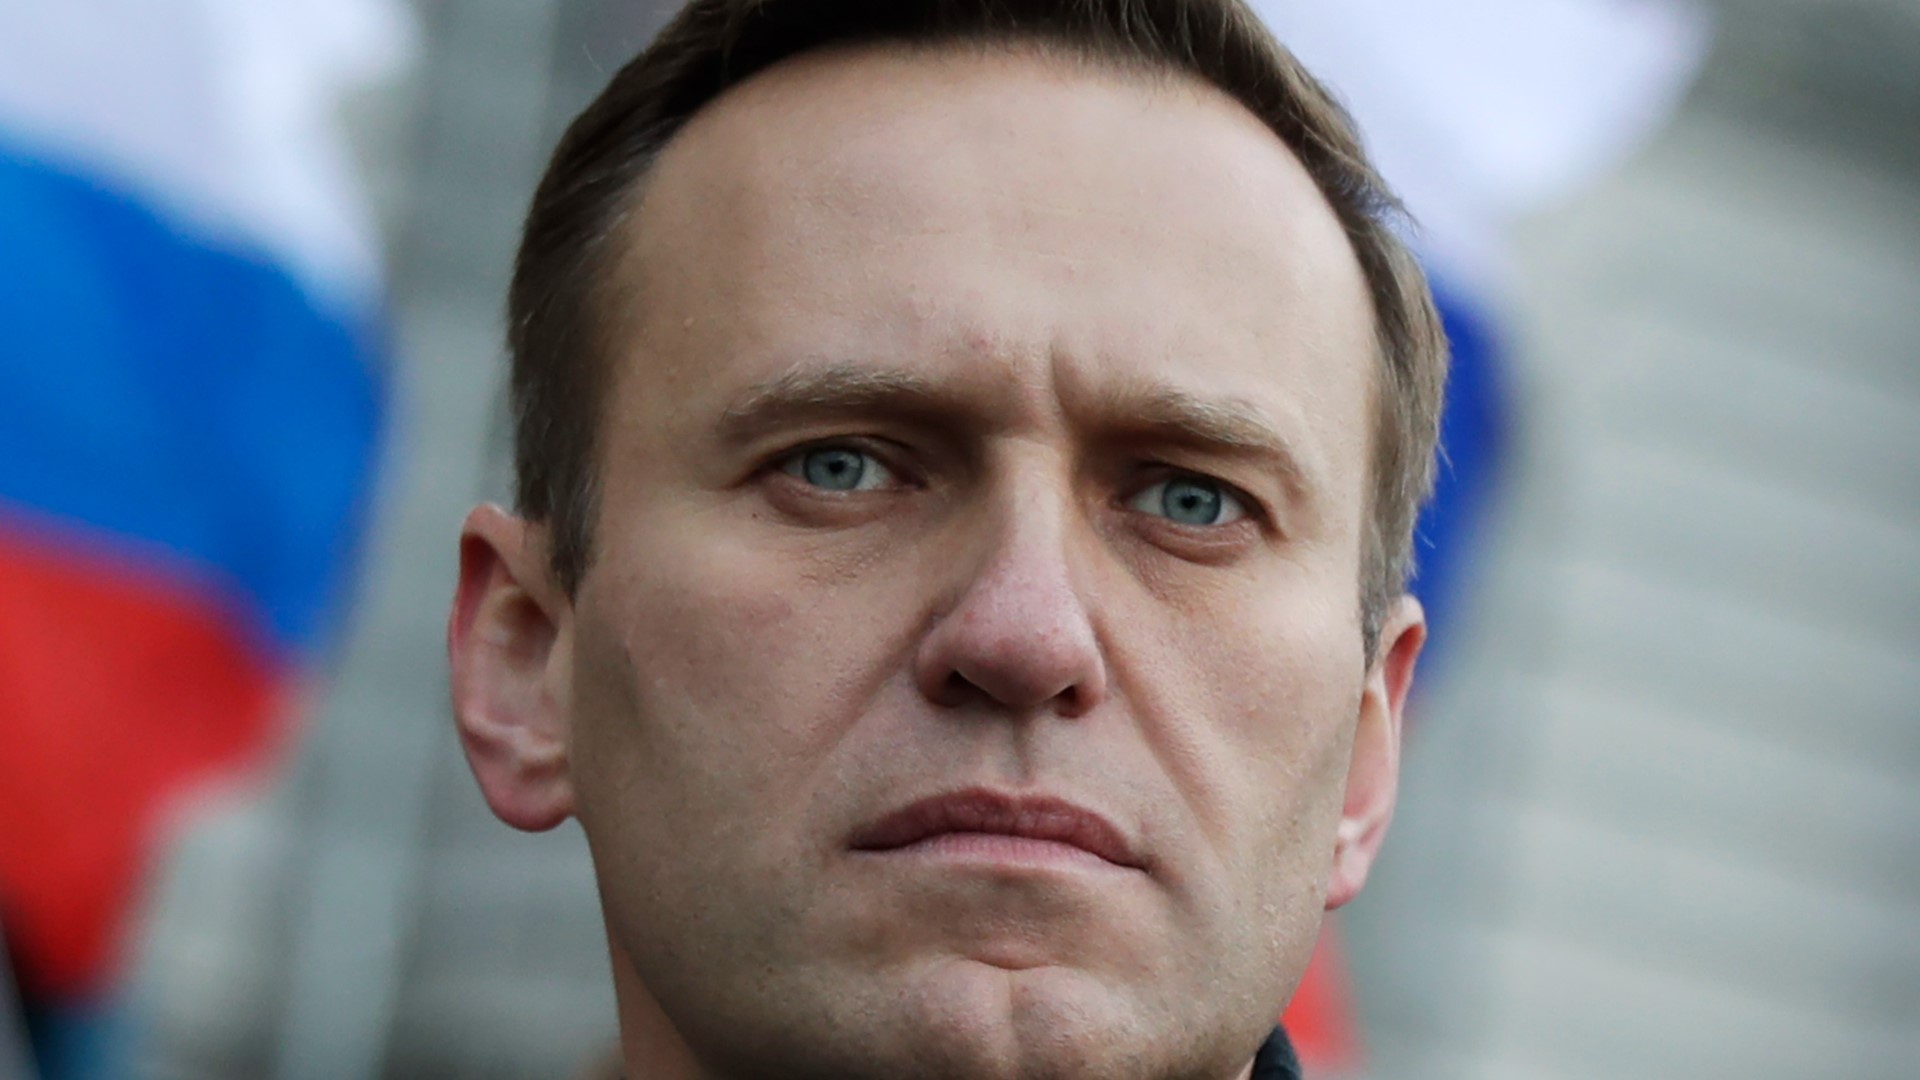 US Secretary of State Antony Blinken said if the reports of Navalny's death were accurate, it showed the "fixation and fear" of Vladimir Putin.